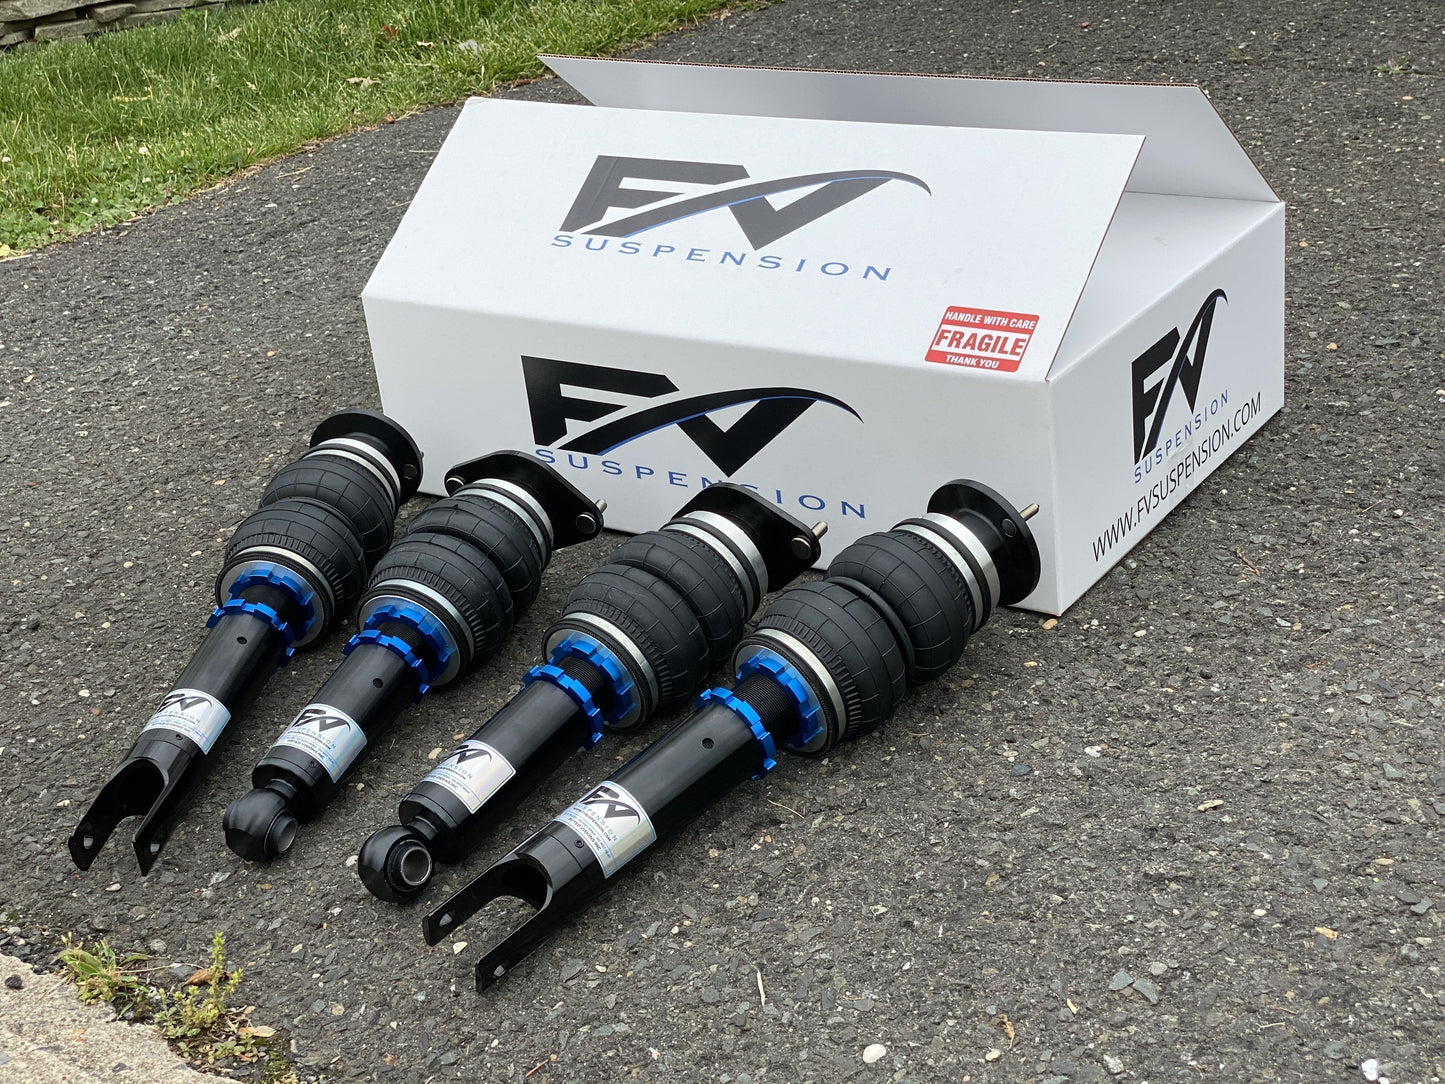 FV Suspension 3H Tier 3 Complete Air Ride kit for 11-17 Audi A8L AWD - Full Kit